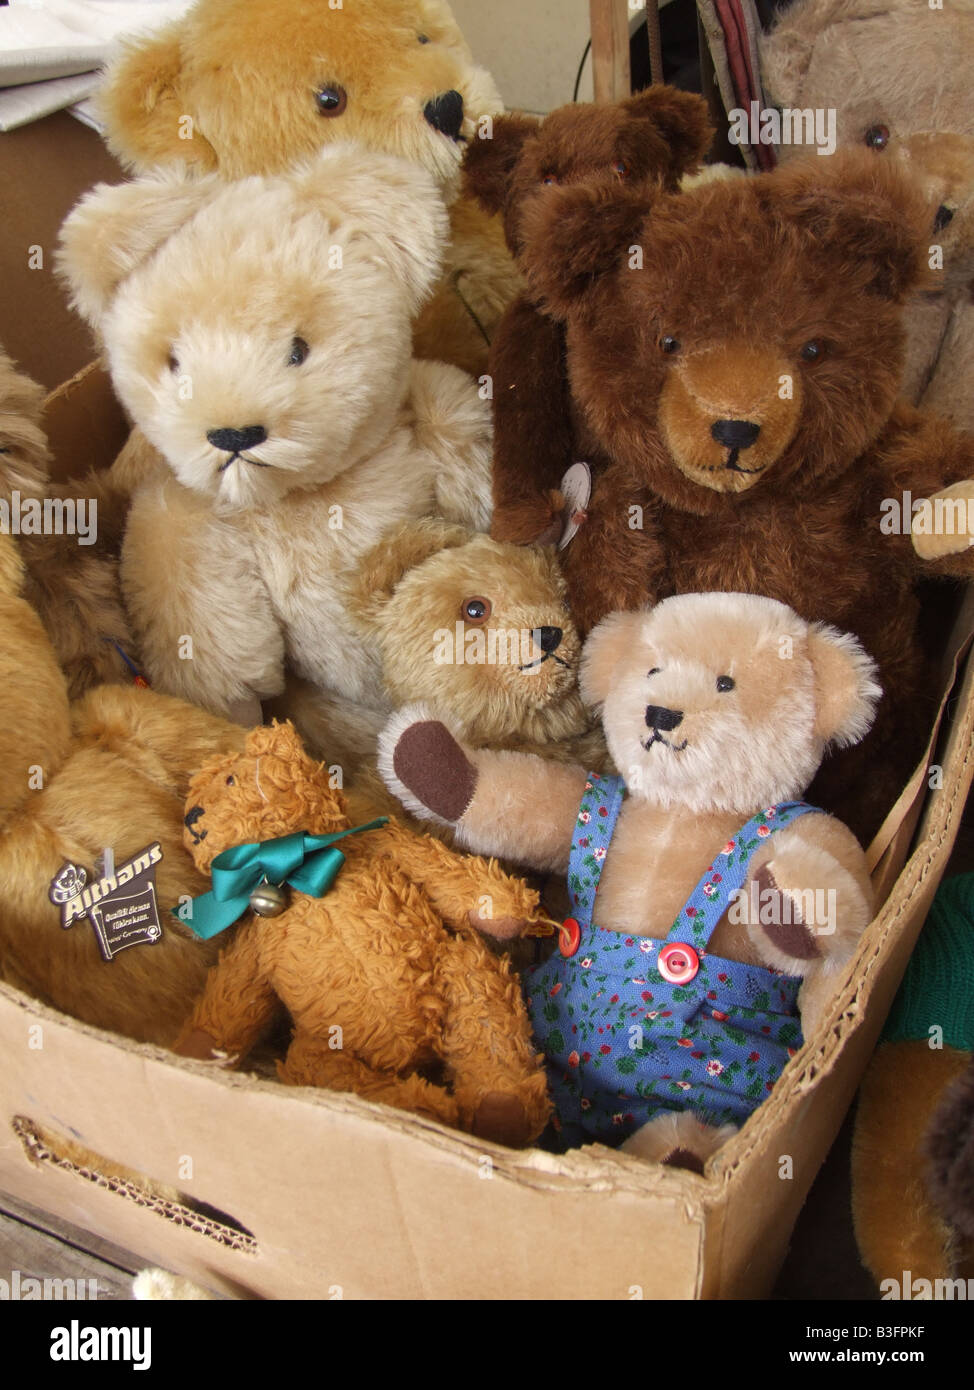 Teddy Bear Stuffing Shop: Over 1,610 Royalty-Free Licensable Stock Photos